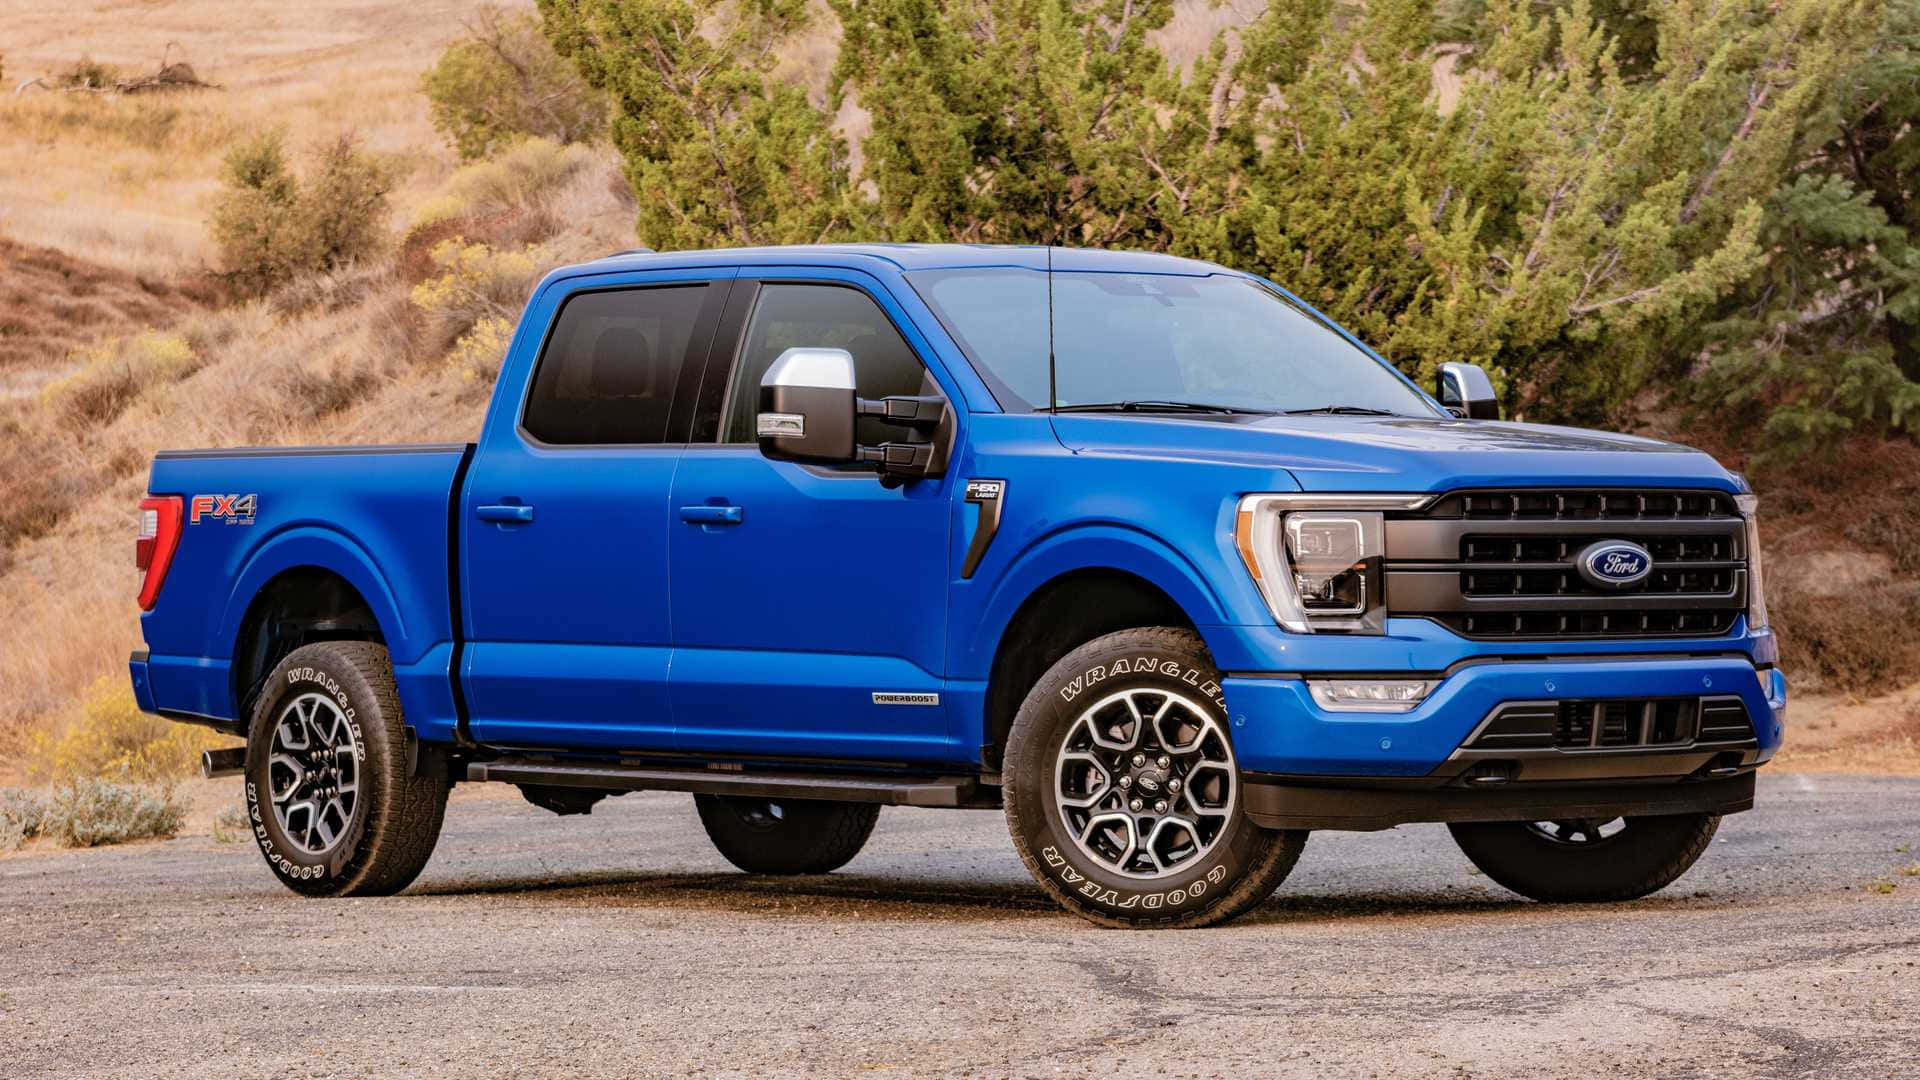 The Blue 2020 Ford F - 150 Is Parked On A Dirt Road